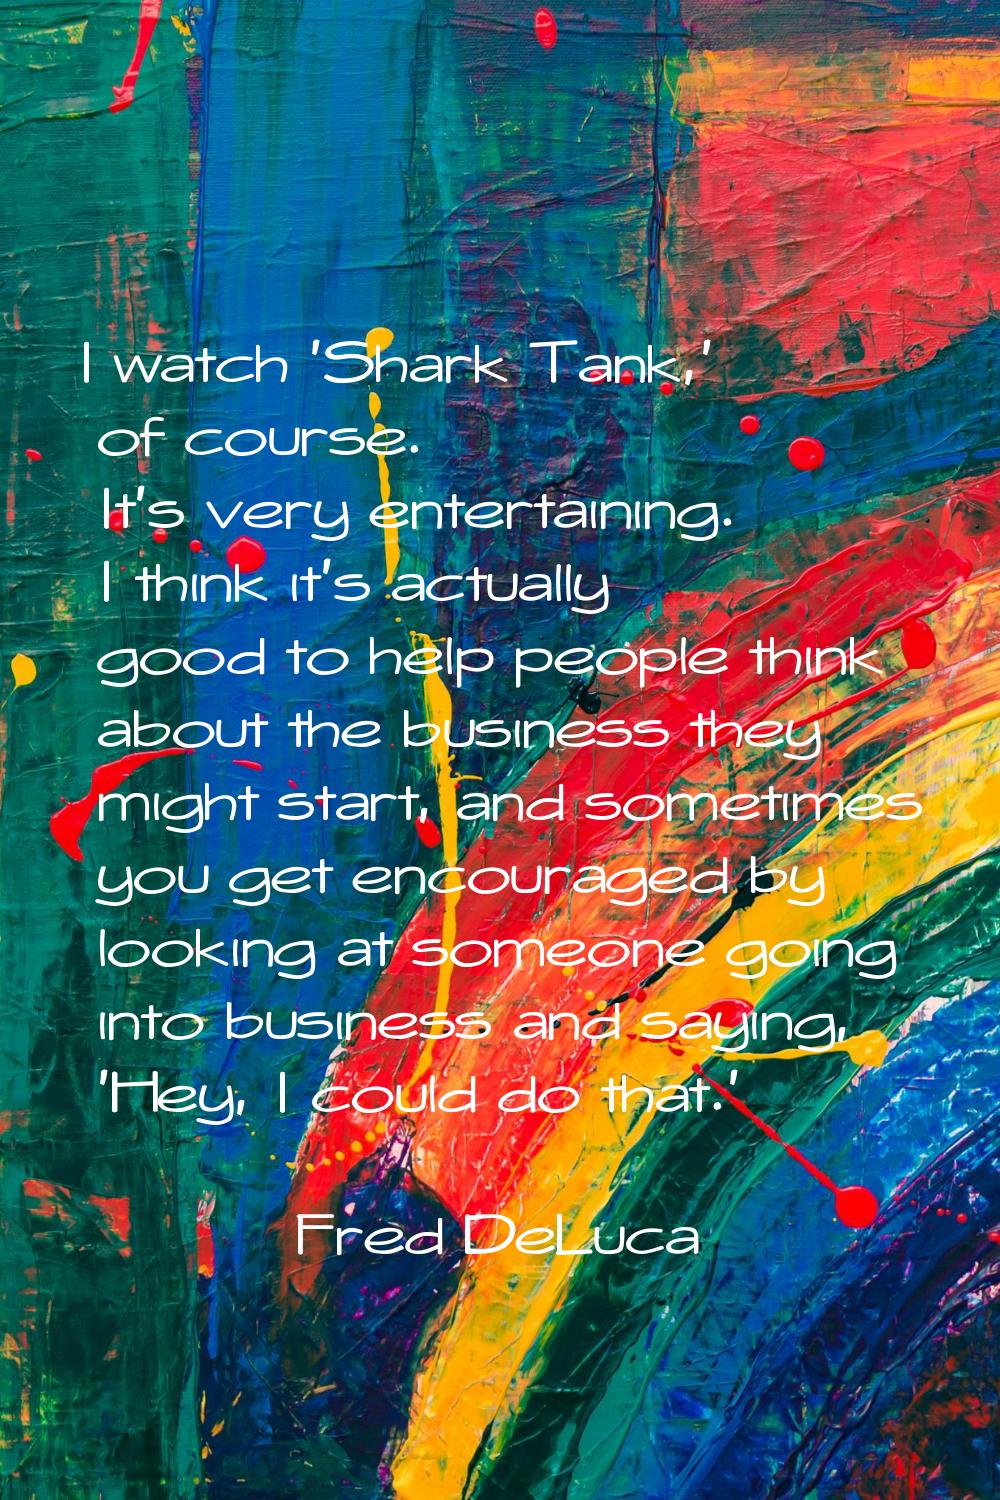 I watch 'Shark Tank,' of course. It's very entertaining. I think it's actually good to help people 